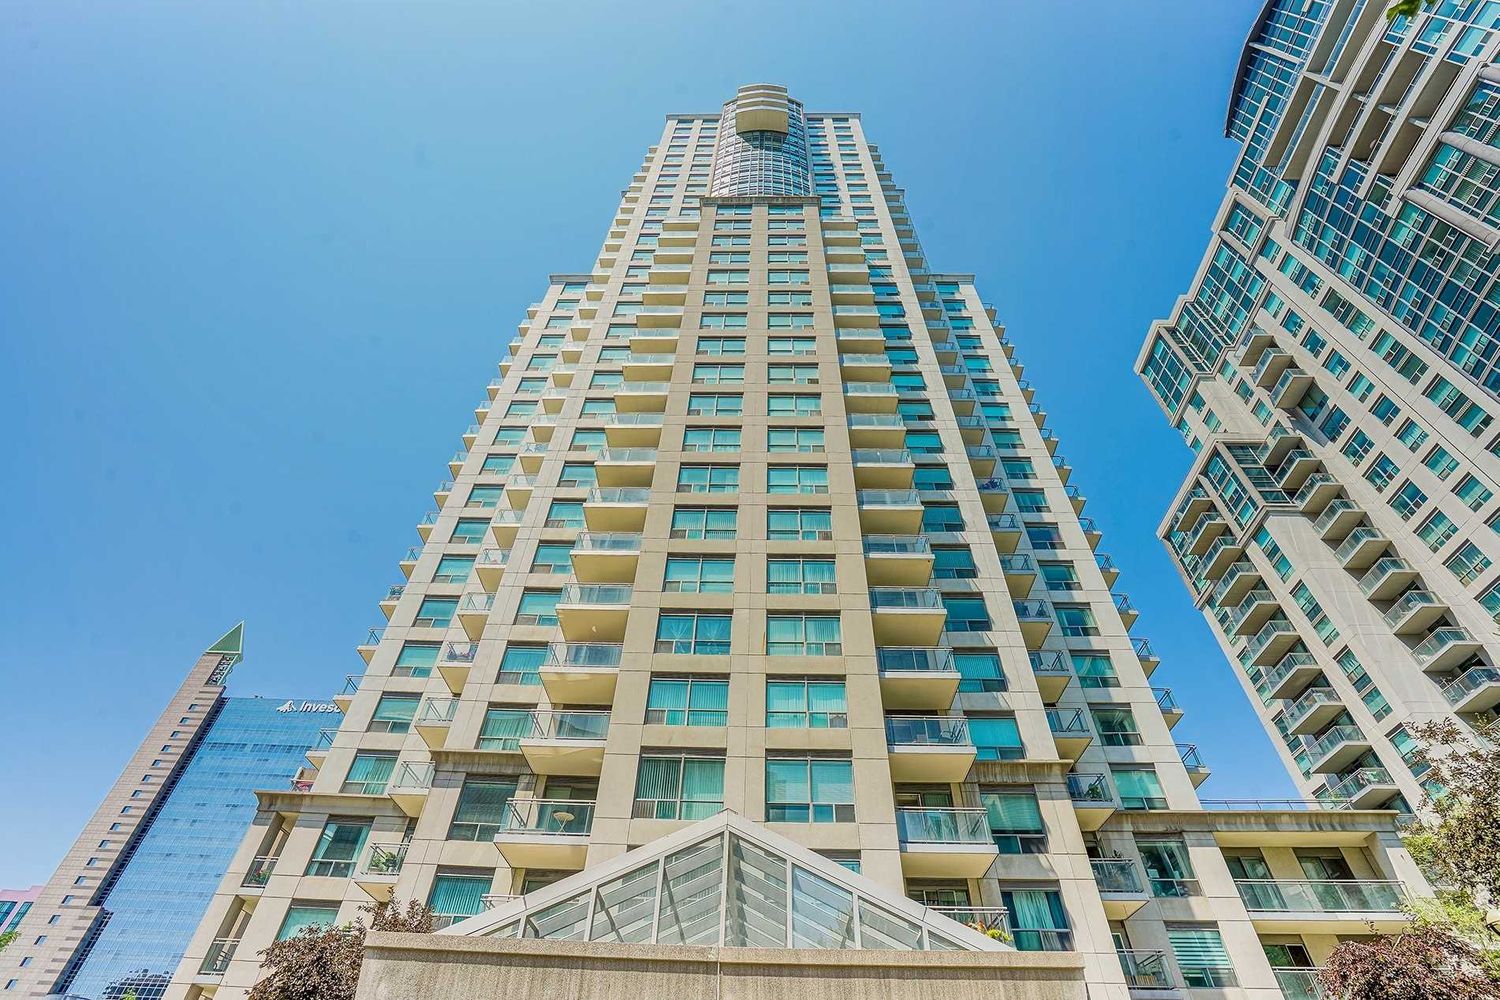 21 Hillcrest Avenue. 21 Hillcrest Condos is located in  North York, Toronto - image #2 of 2